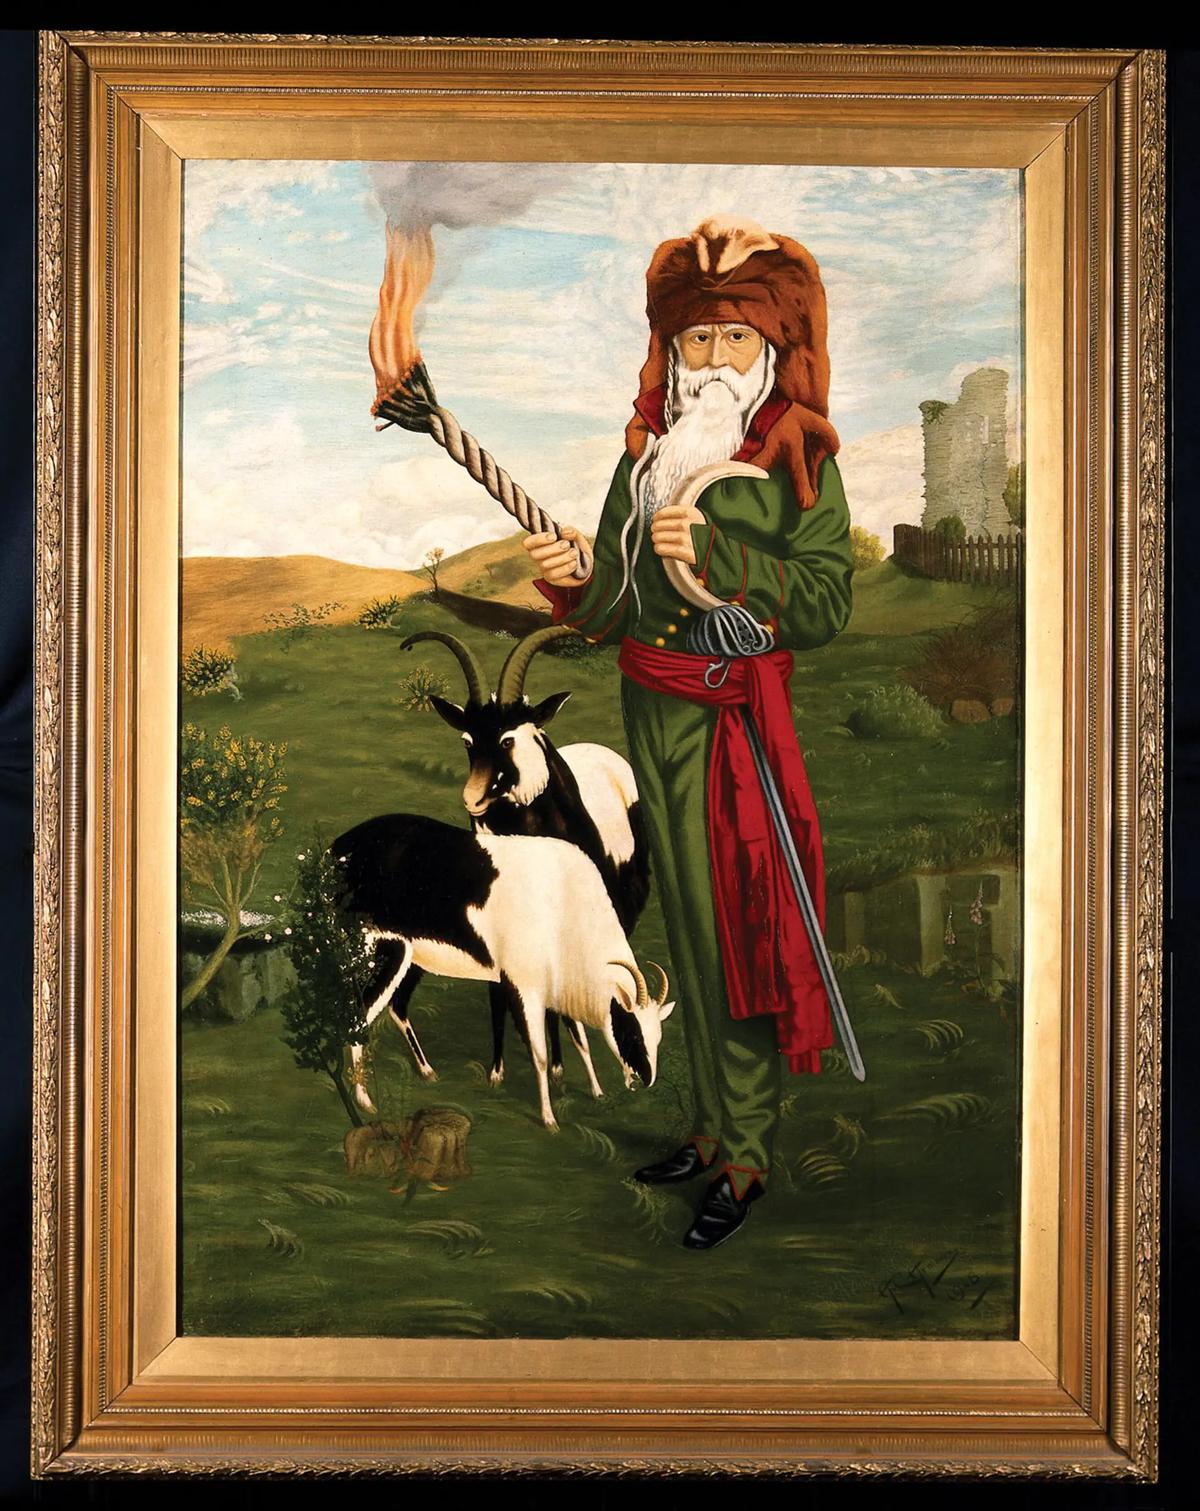 William Price of Llantrisant, in druidic costume, with goats by Alfred Charles Hemming (1918), Wellcome Collection, London. Courtesy of the Wellcome Collection